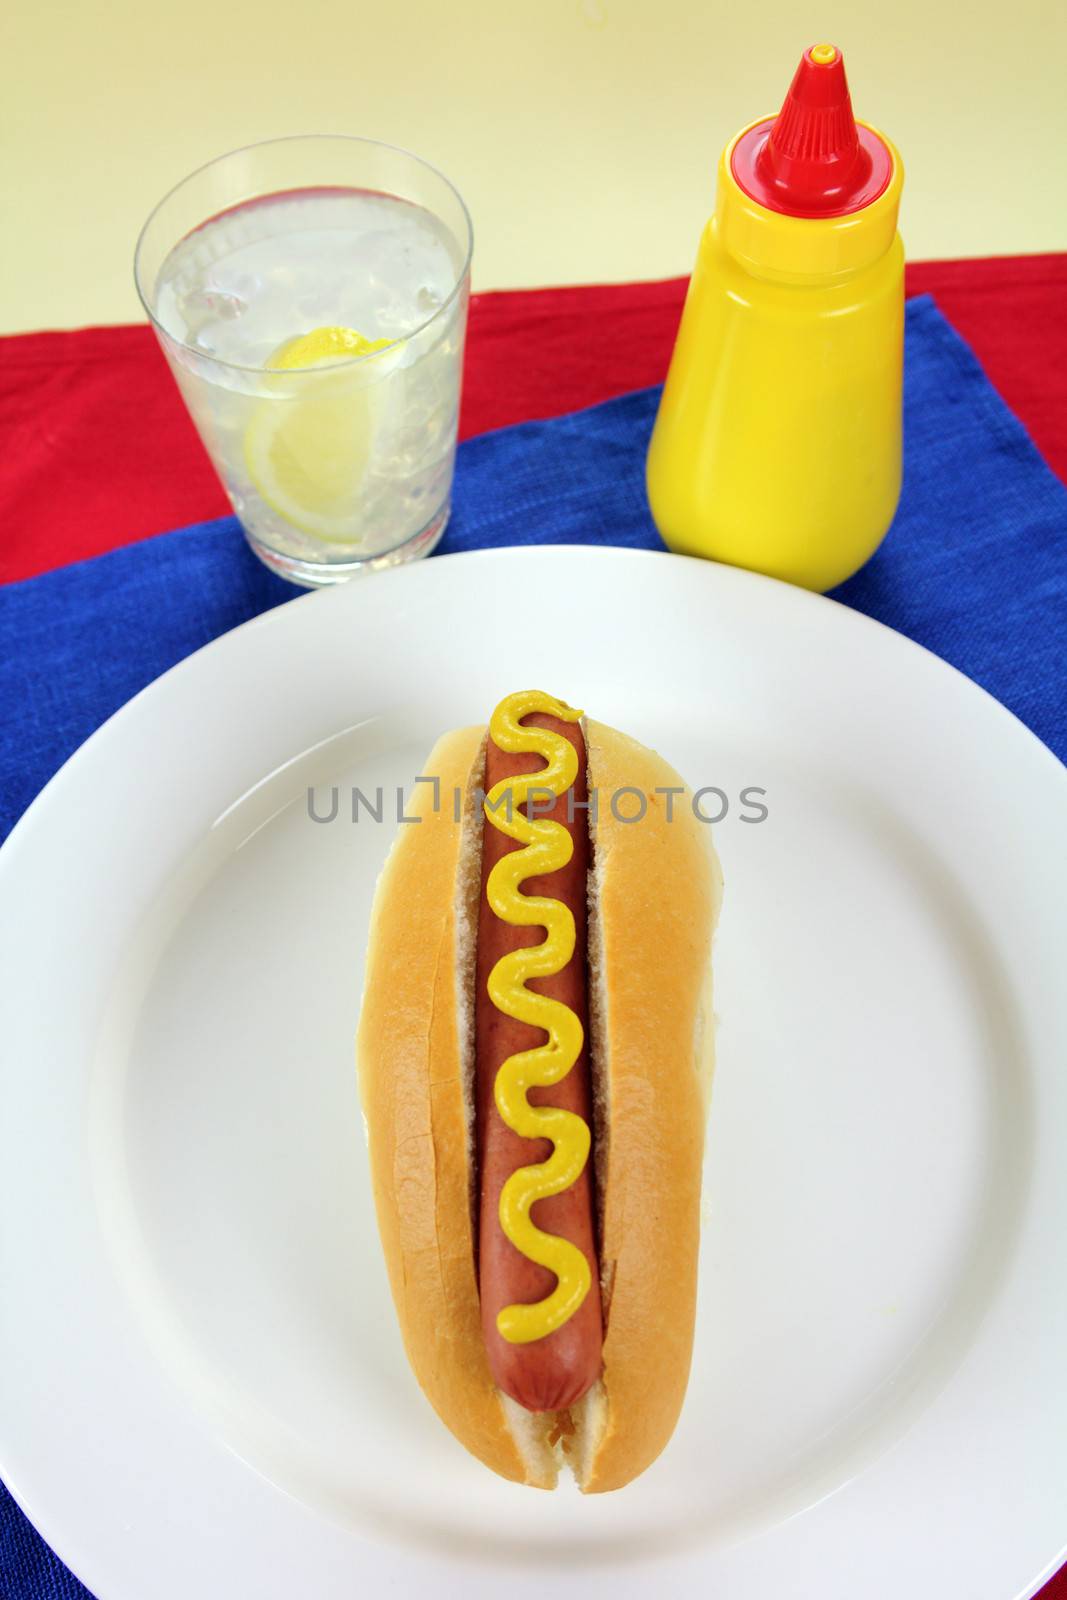 American hot dog with mustard on red and blue napkins.